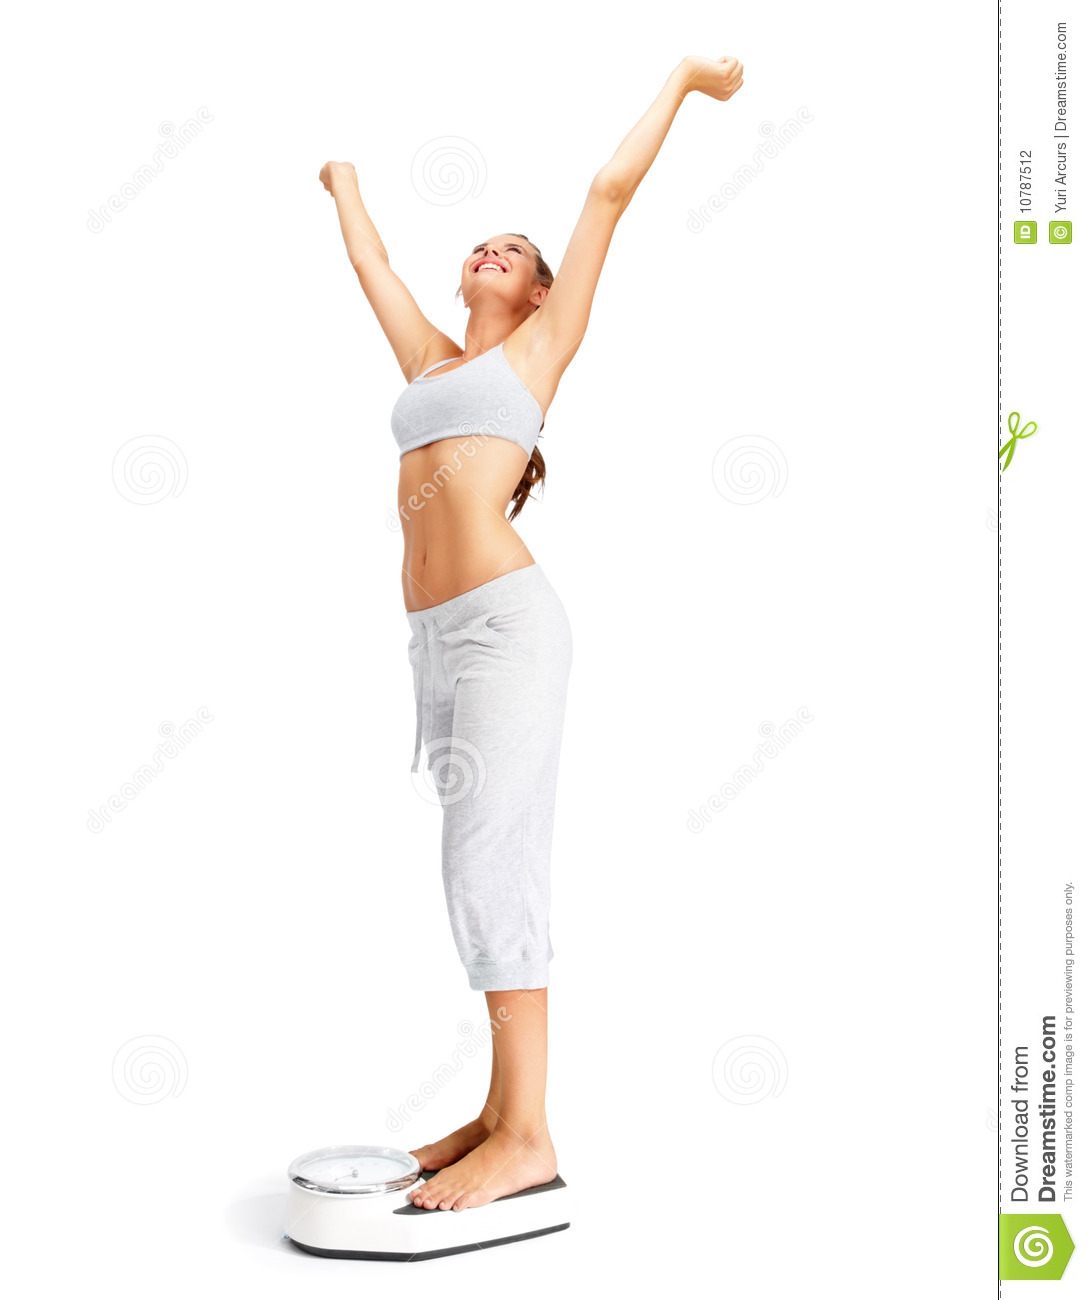       Weight Loss   Fit Young Girl On A Weighing Scale  Image  10787512